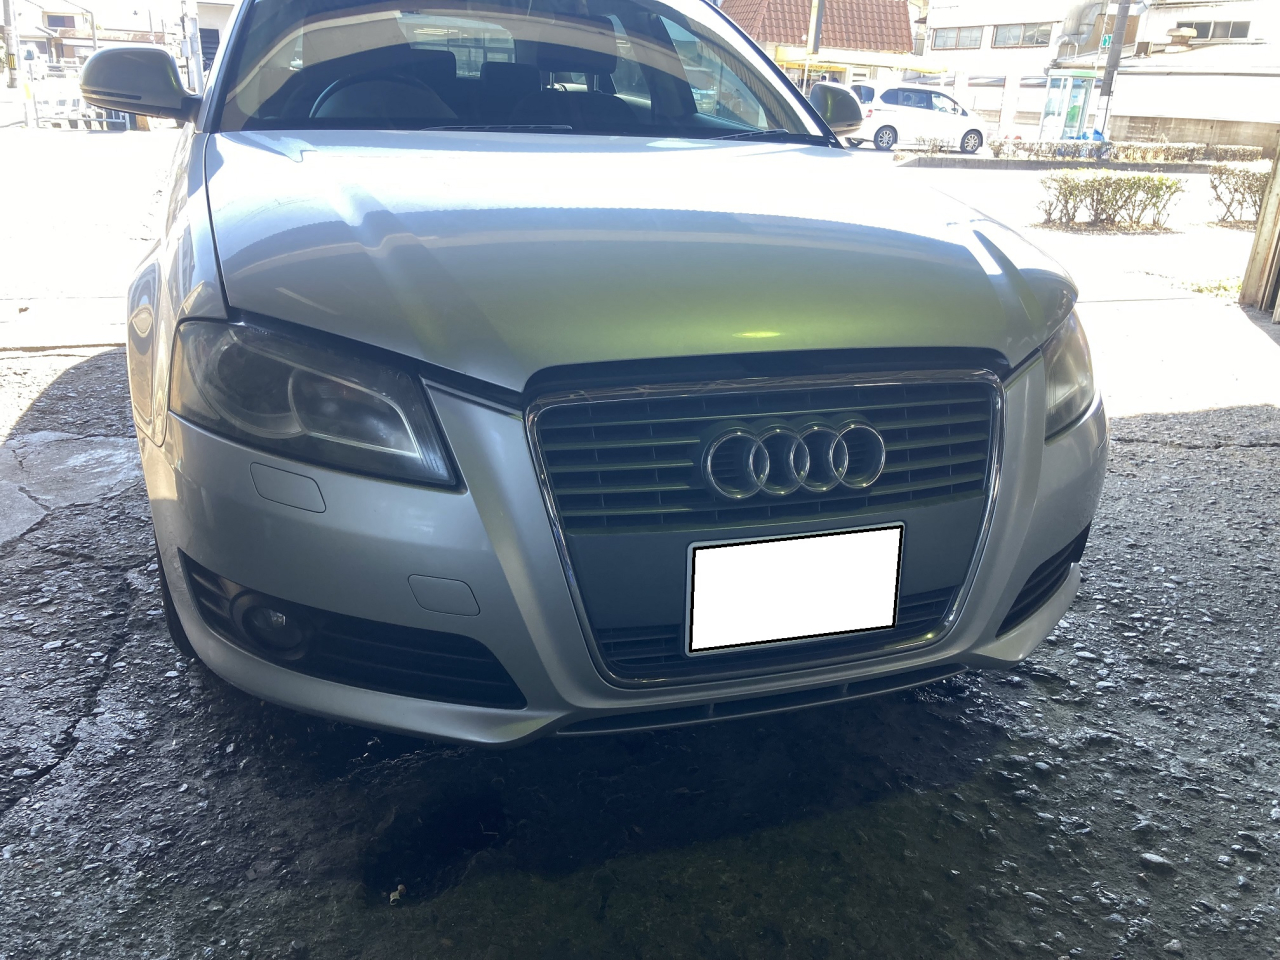 Audi　A３車検・２４カ月点検・整備で入庫しました。